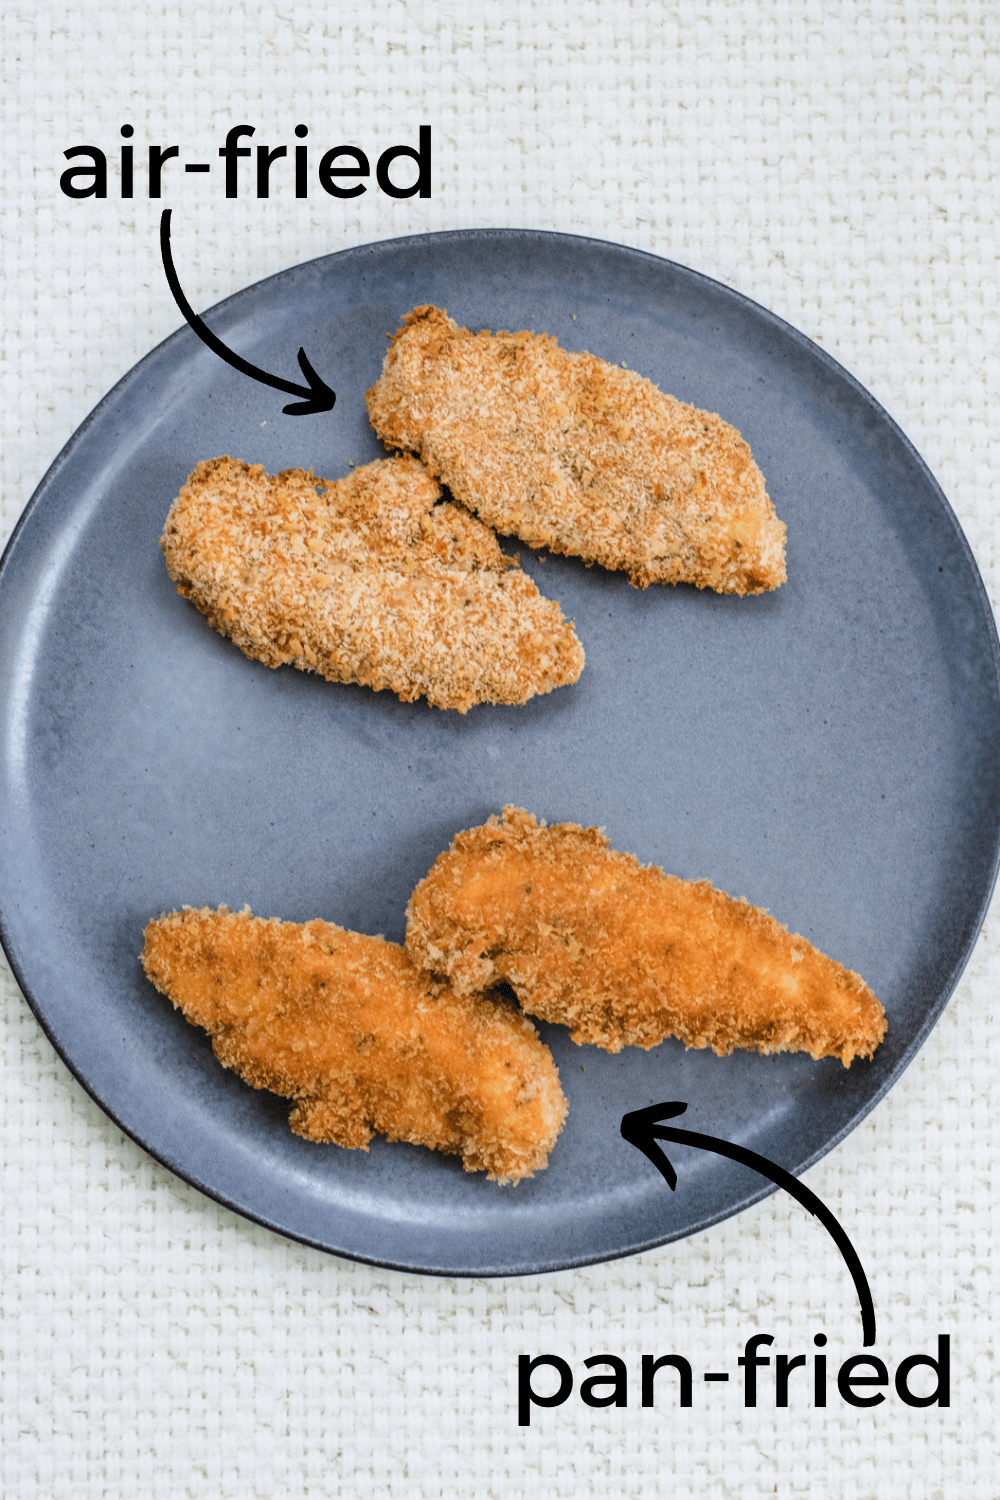 2 air fried panko chicken tenders and 2 pan fried panko chicken tenders on a gray plate on a white wicker background